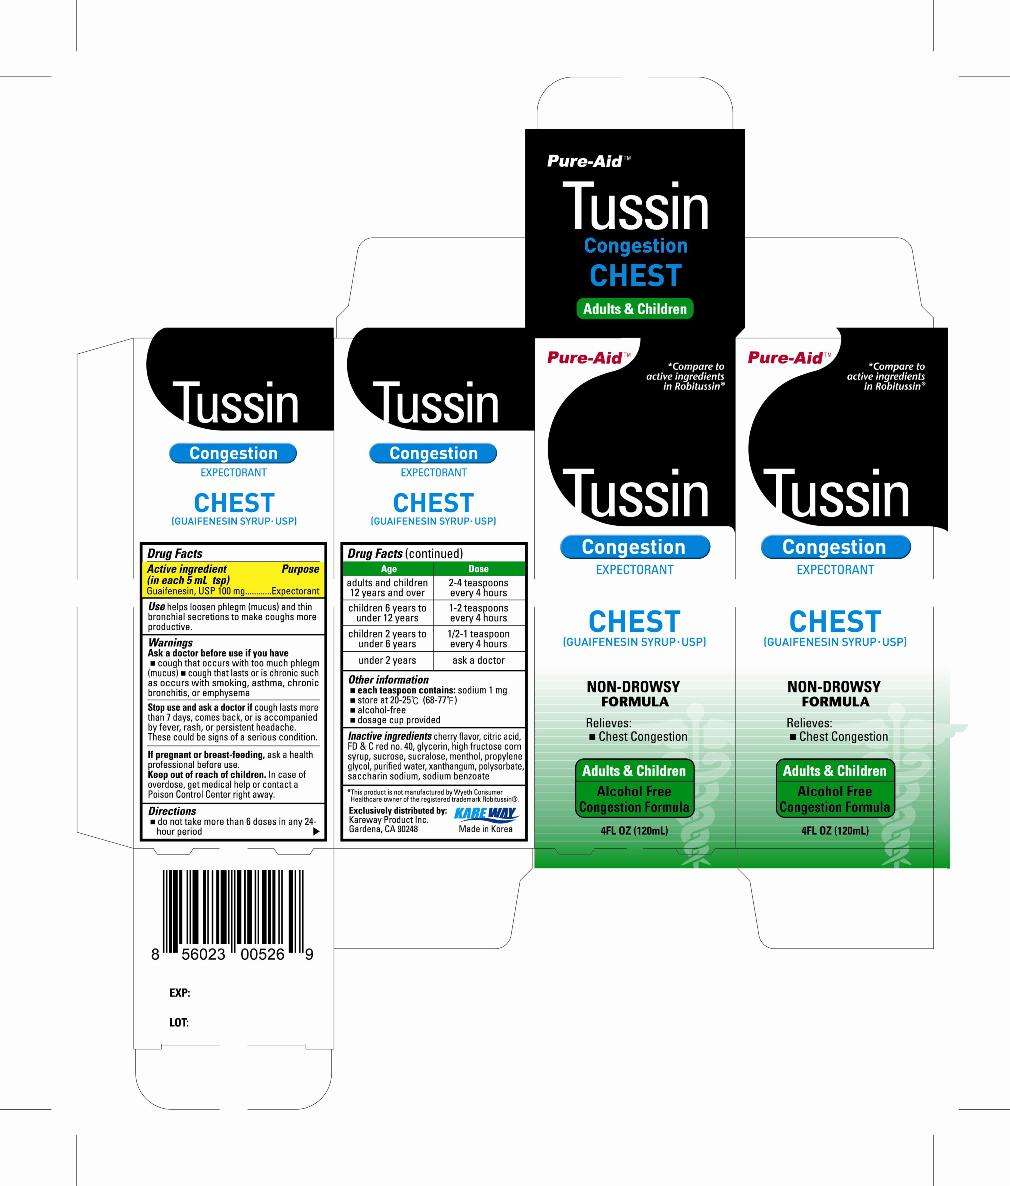 Tussin Chest